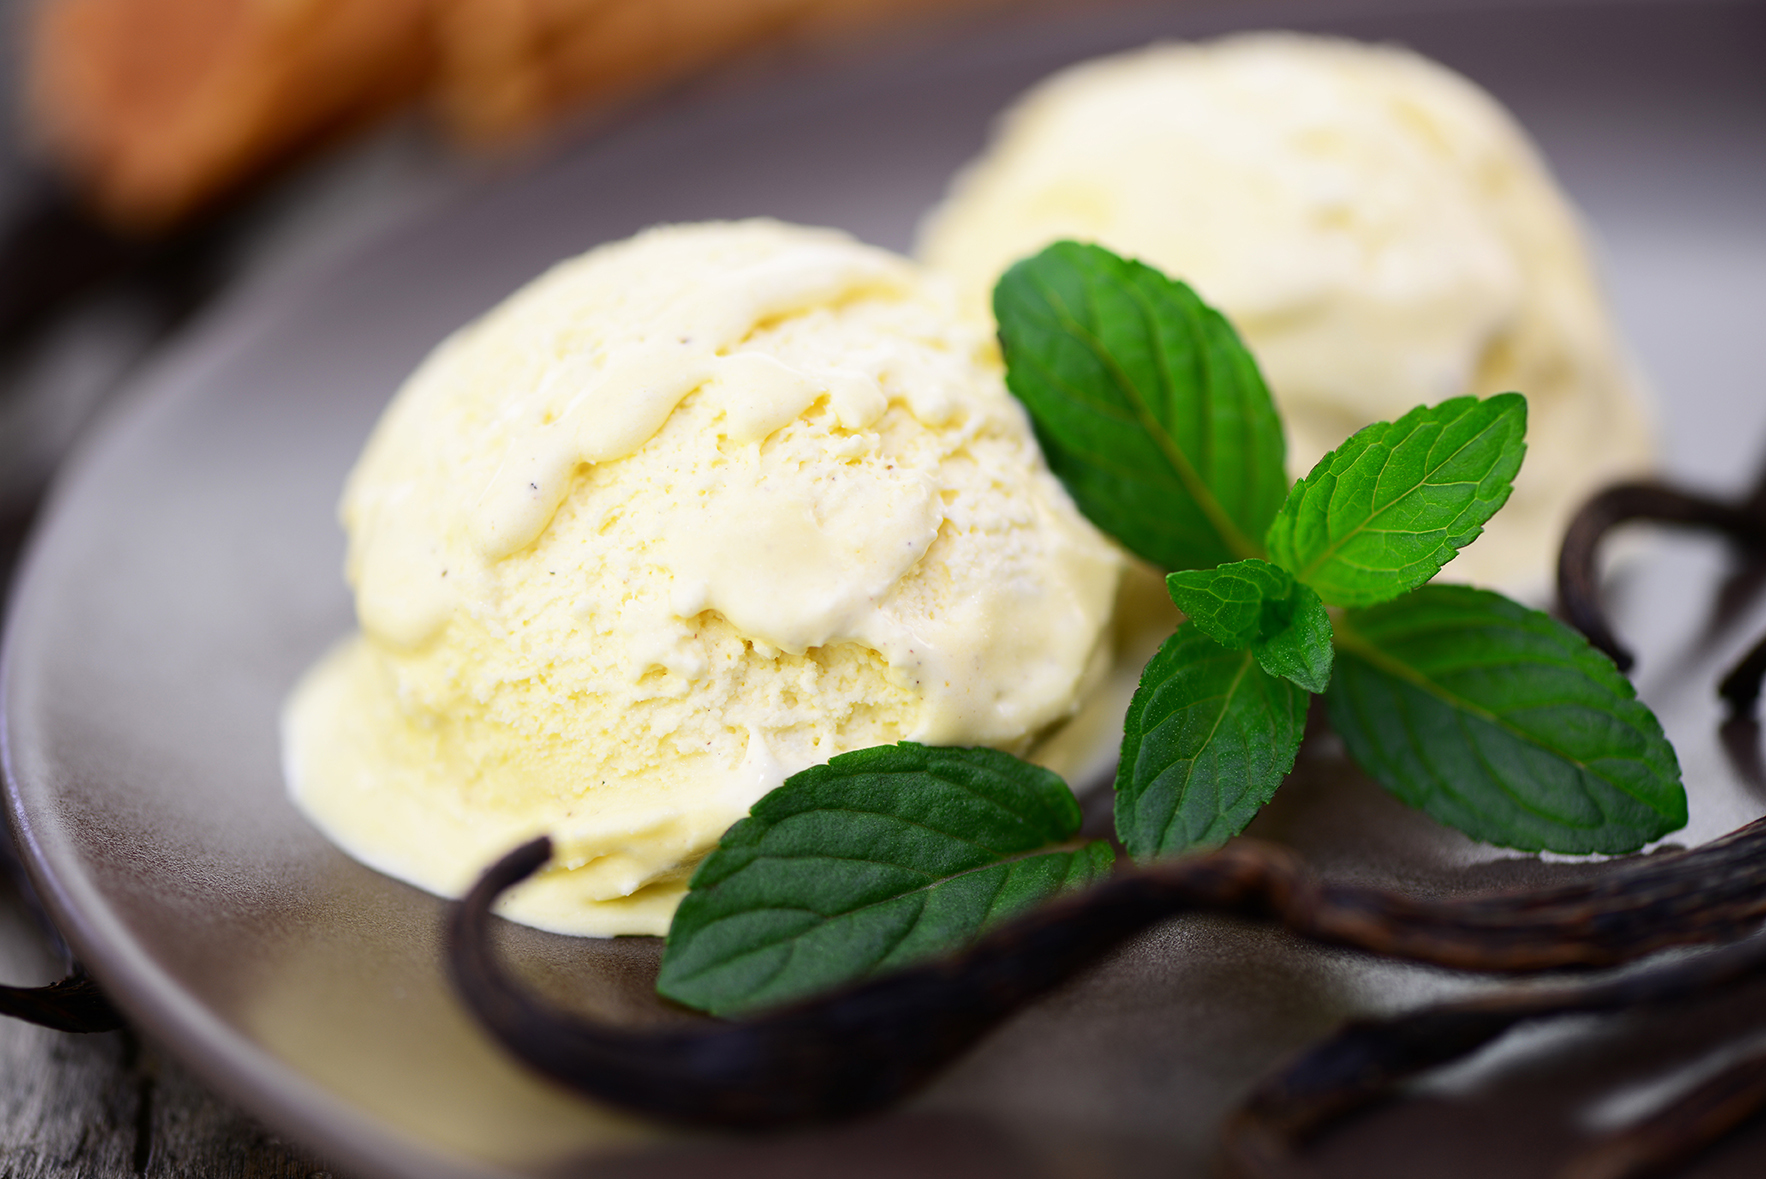 Throughout the summer we offer our customers a selection of handmade ice cream in different formats. From a simple scoop of ice cream, to the most sophisticated ice-cream cup becomes a memorable experience.